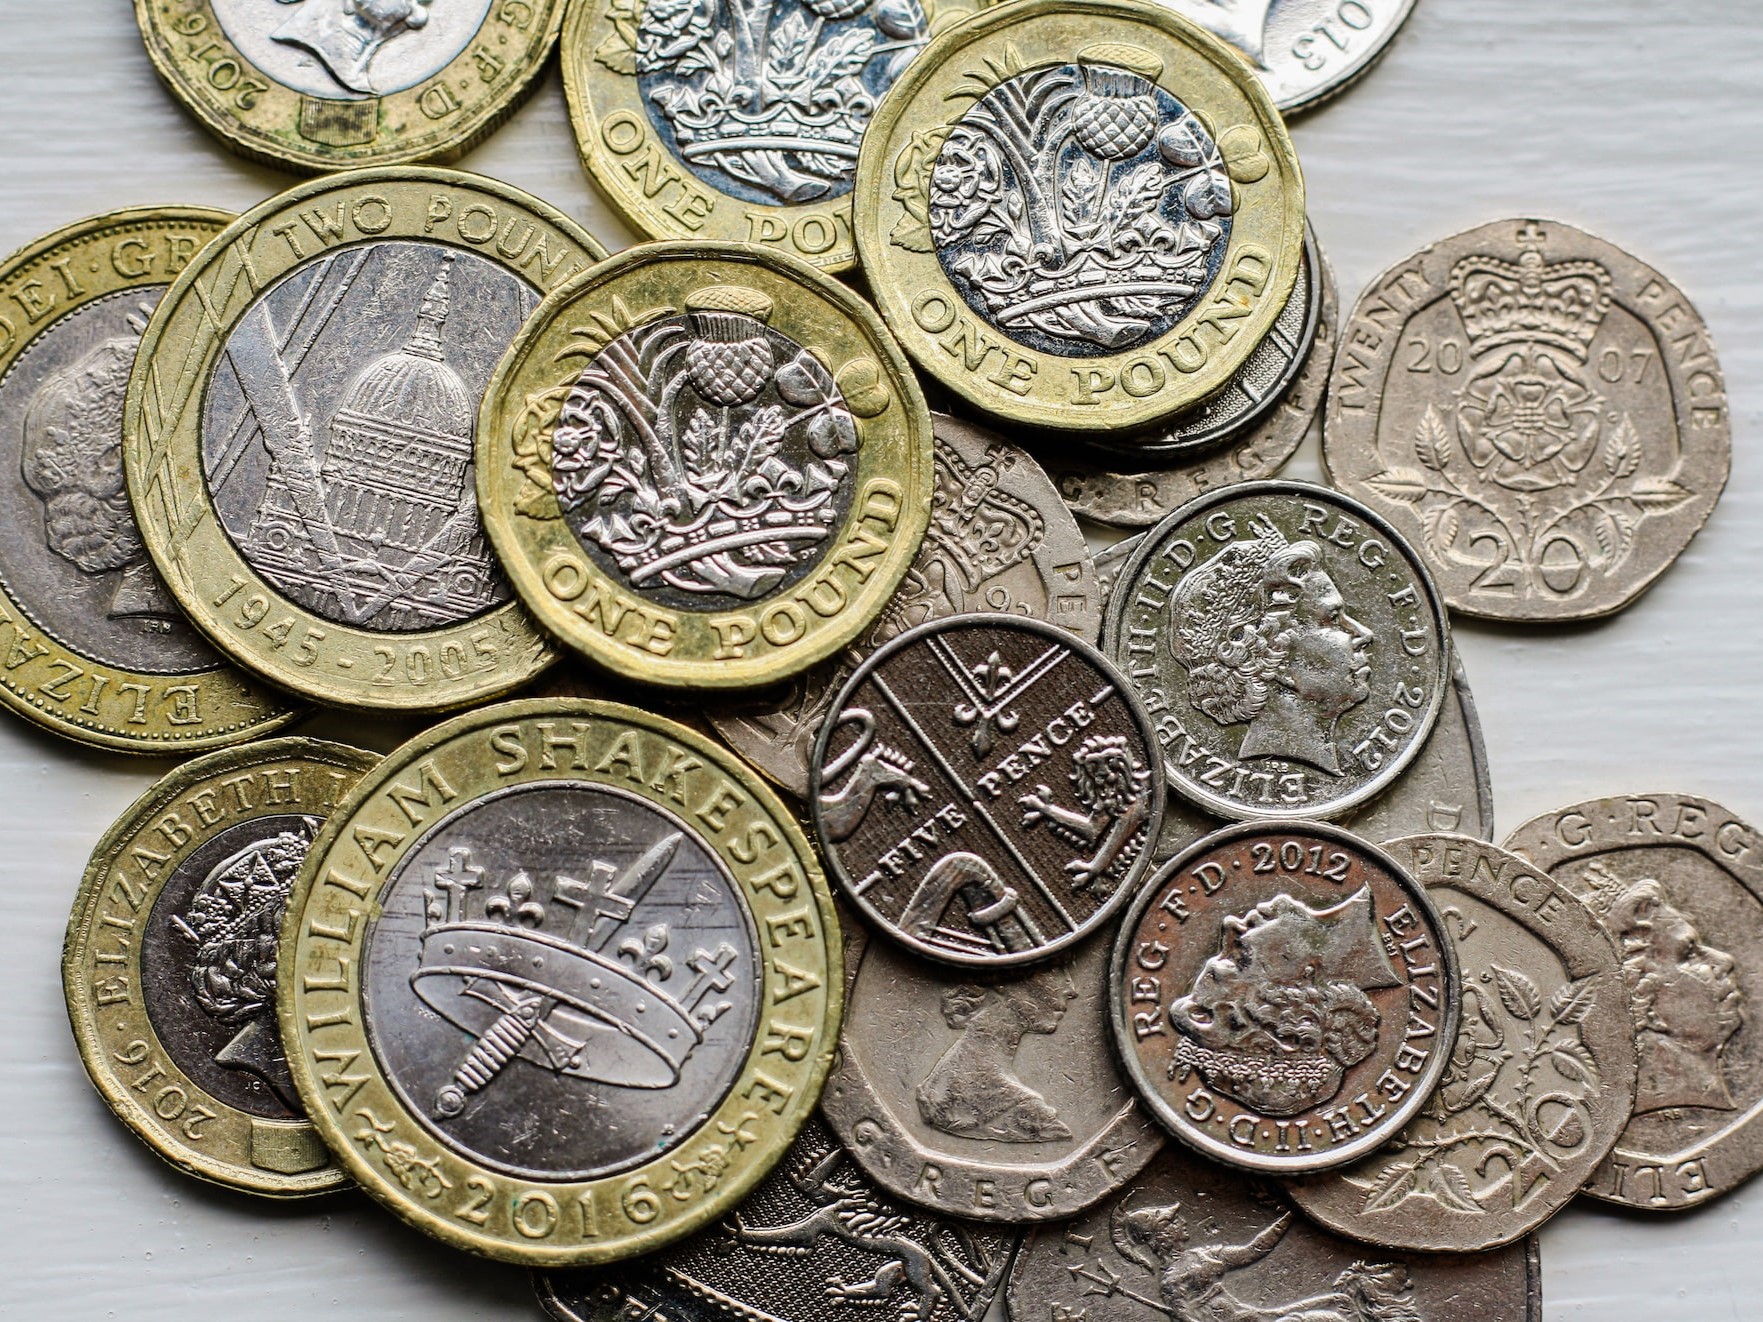 A selection of British coins viewed from above